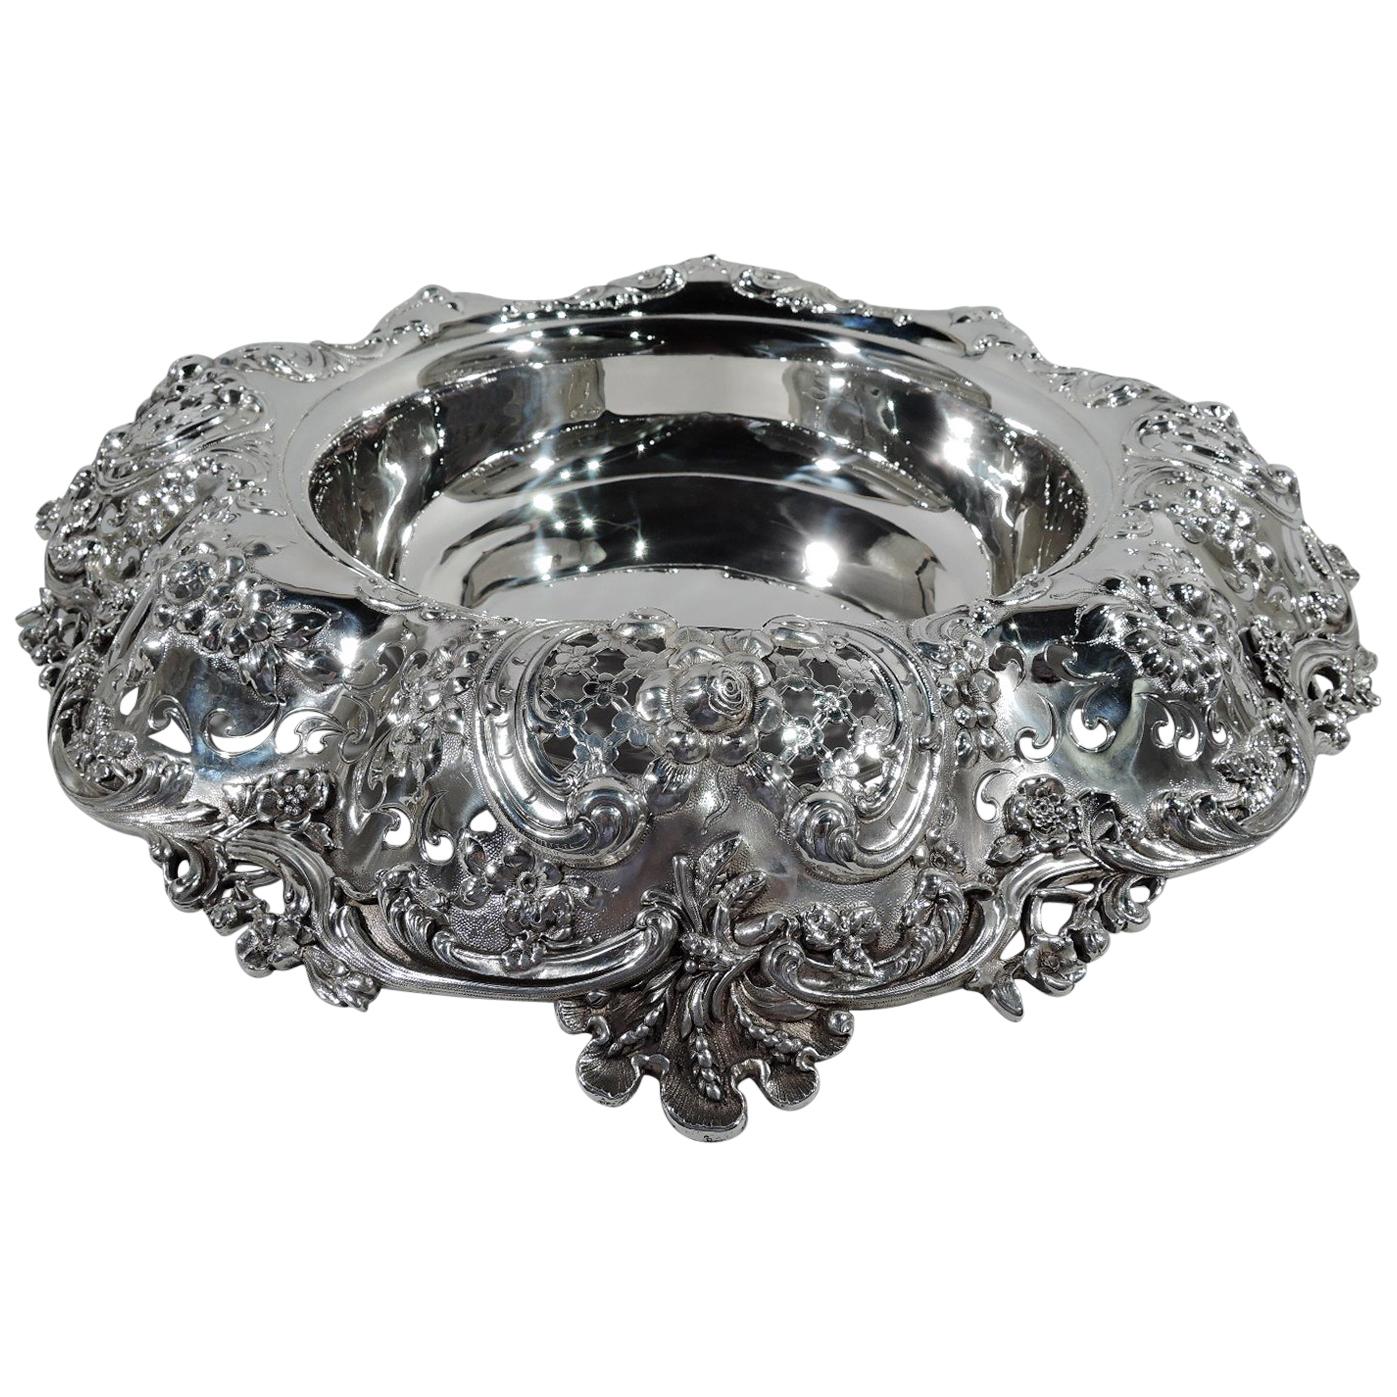 Gilded Age Sumptuous Sterling Silver Centerpiece Bowl by Tiffany & co.